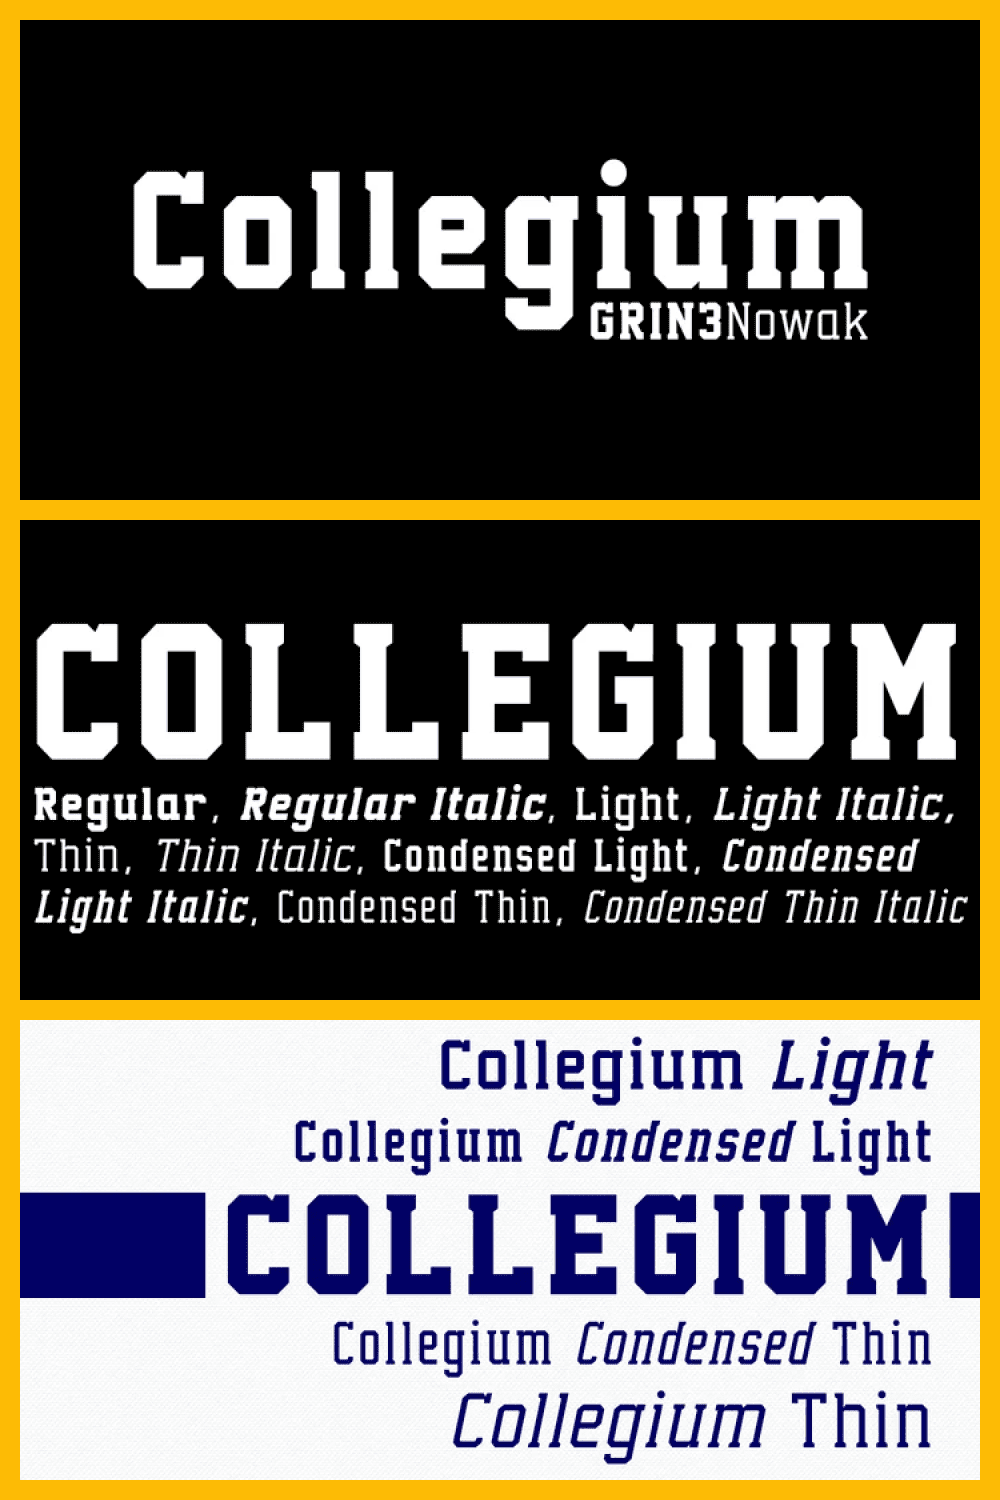 The Collegium is a font family inspired by college and university sportswear lettering.